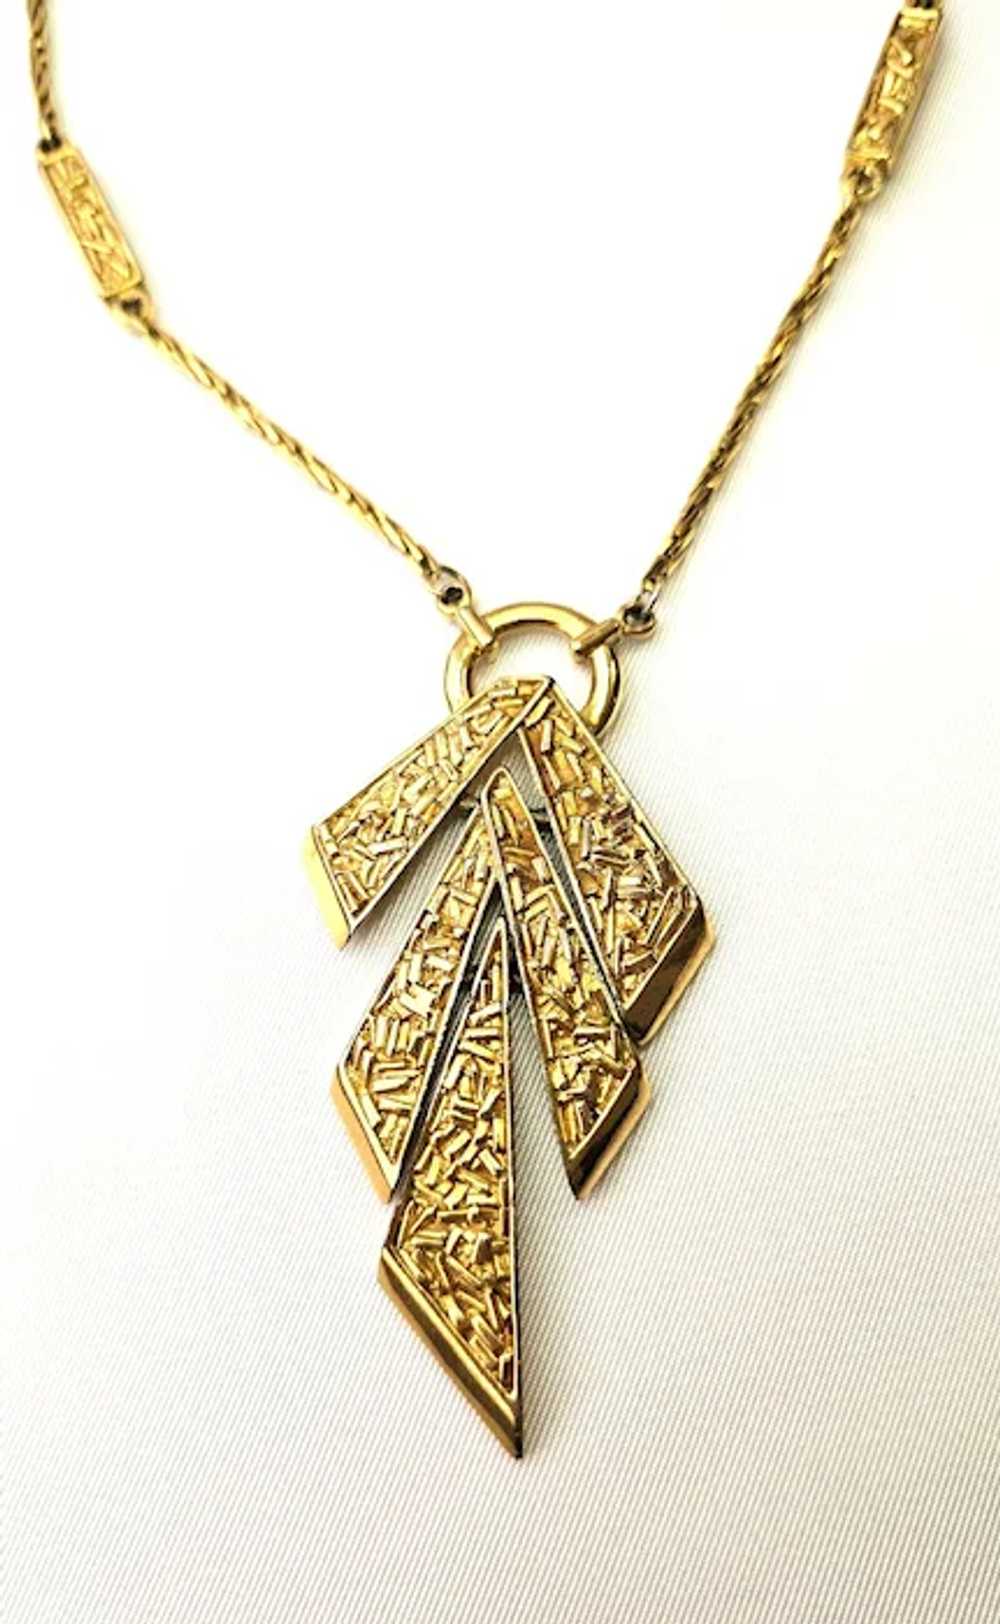 Vintage Trifari Gold-Tone Metal Sections Necklace - image 9